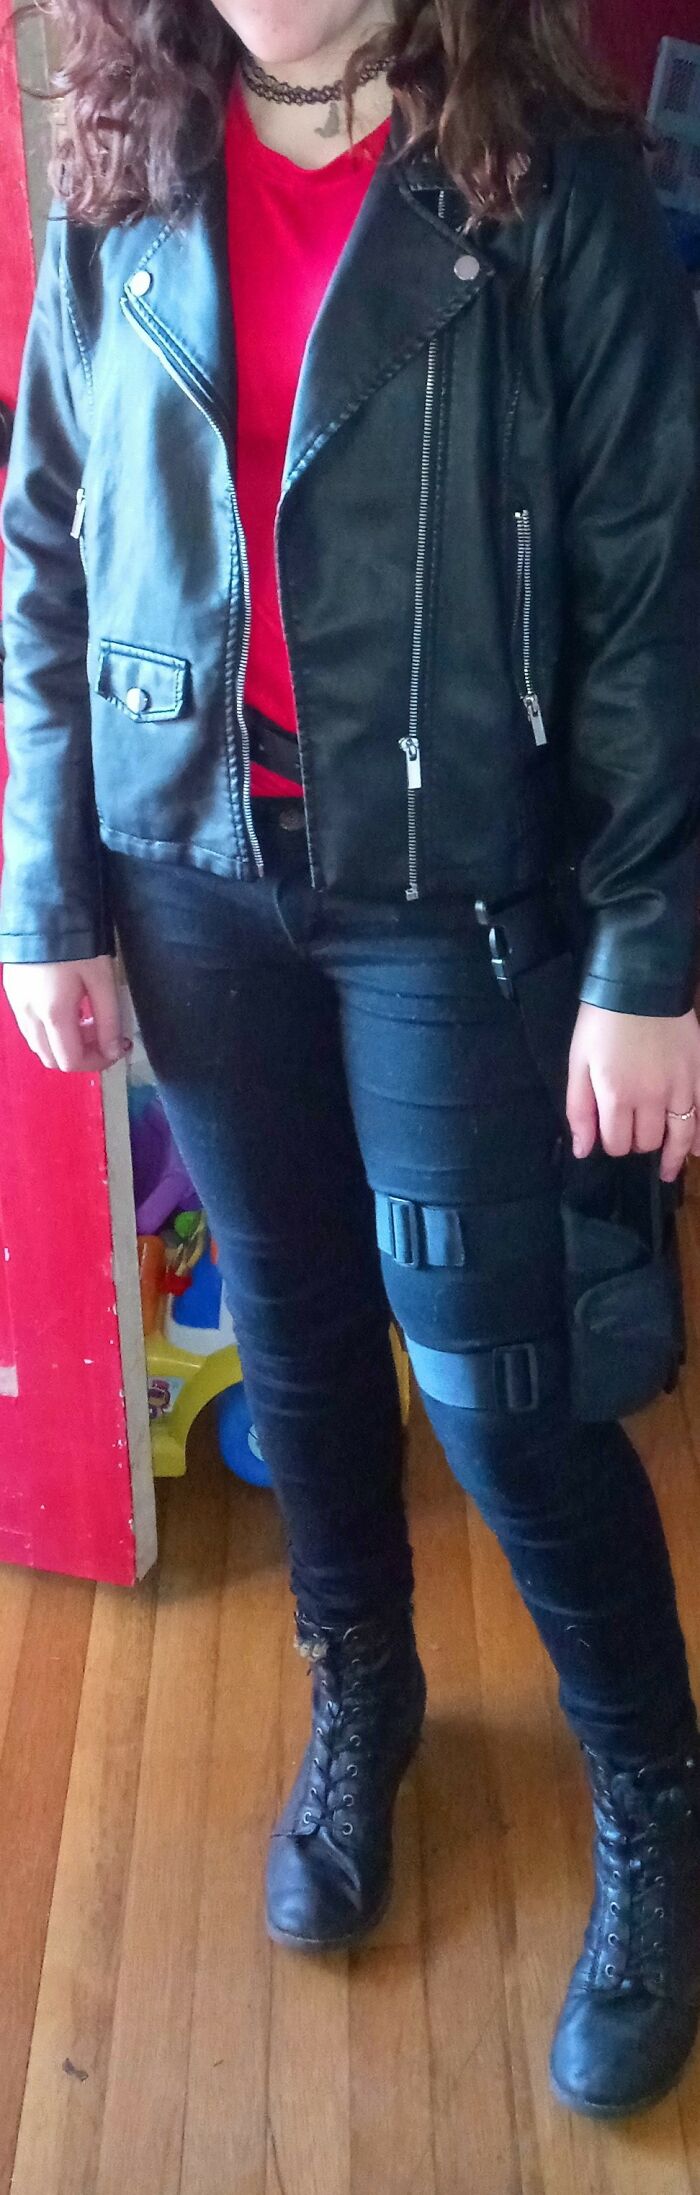 Black Widow Halloween Costume From Avengers In The Helicarrier